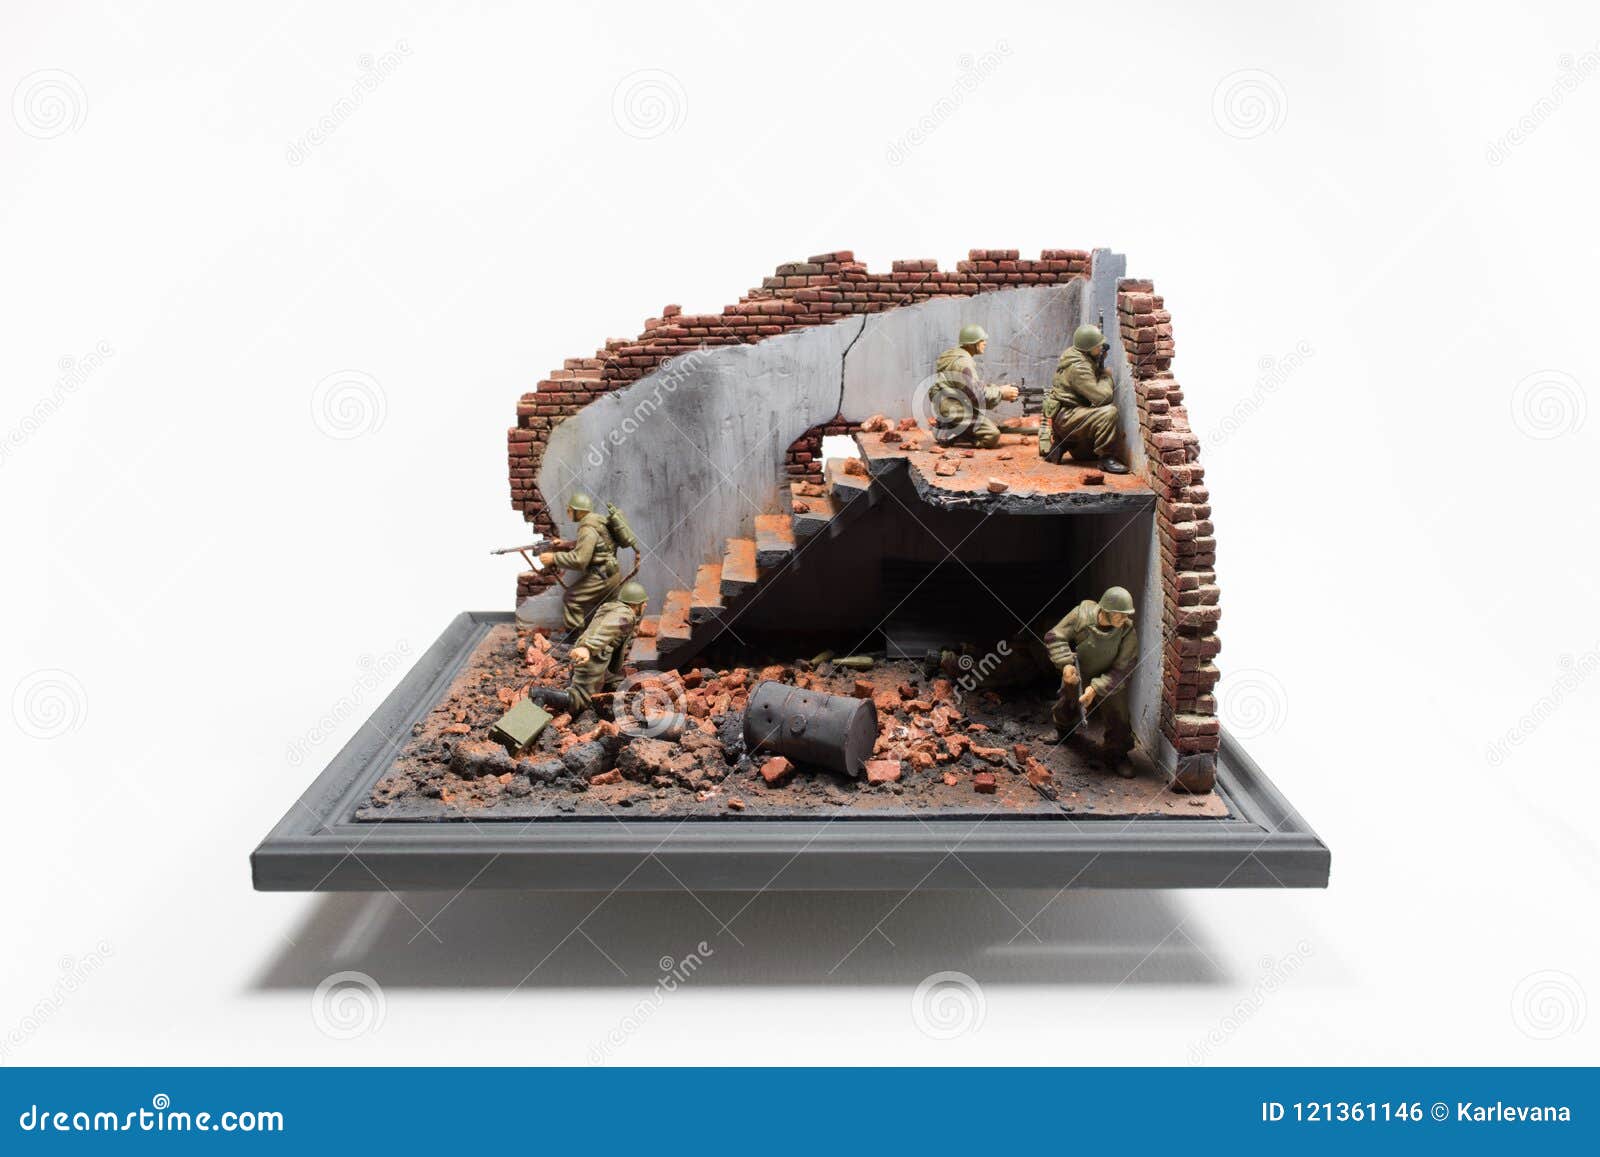 Diorama of Storm Indoors in Ruined Building with Six Soviet Sold